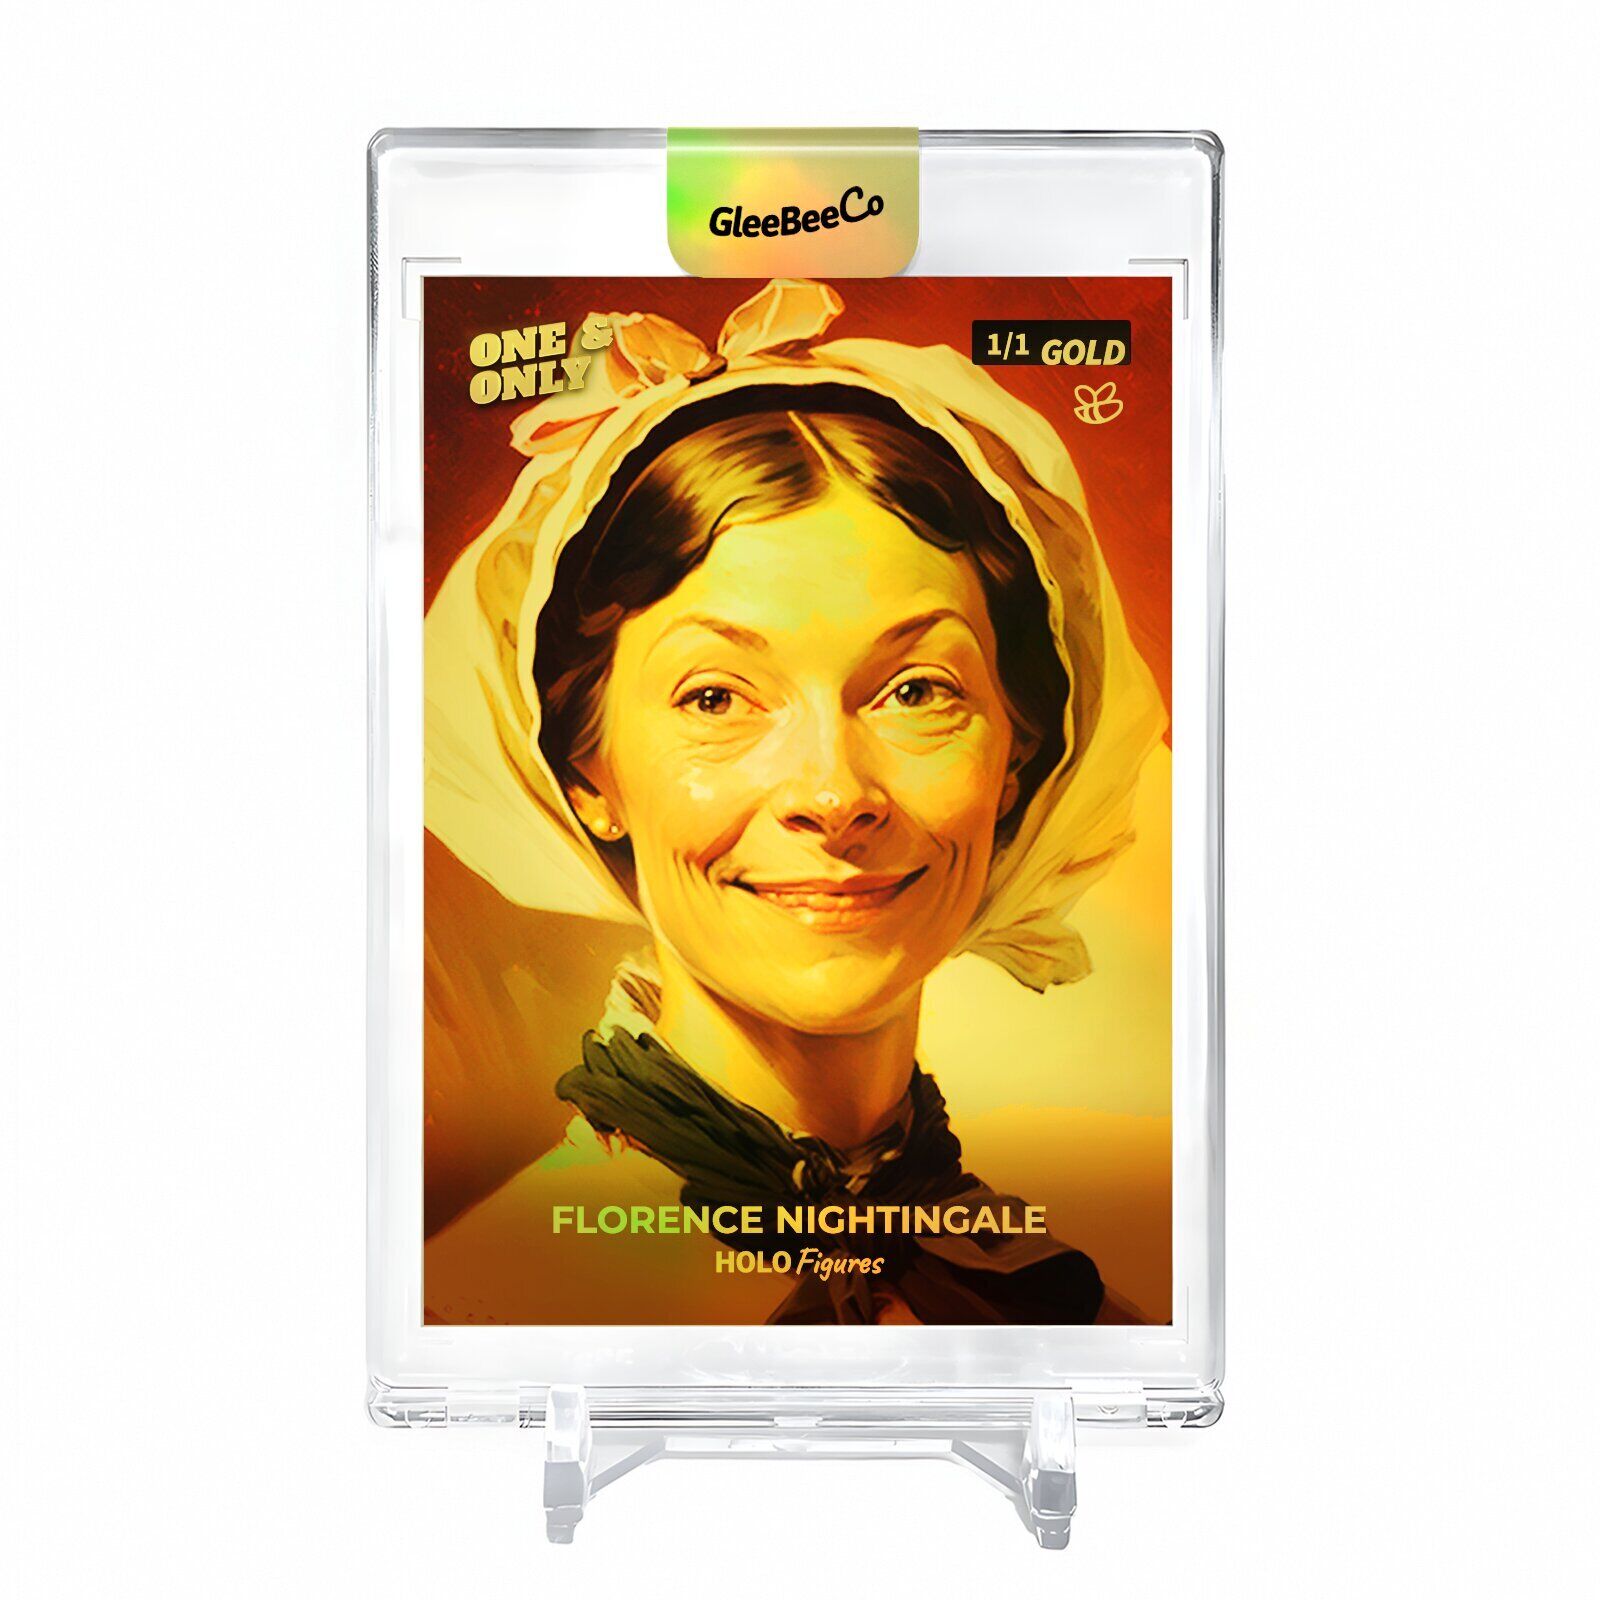 FLORENCE NIGHTINGALE Art Trading Card #FNFM - Jaw-dropping *GOLD* Encased 1/1